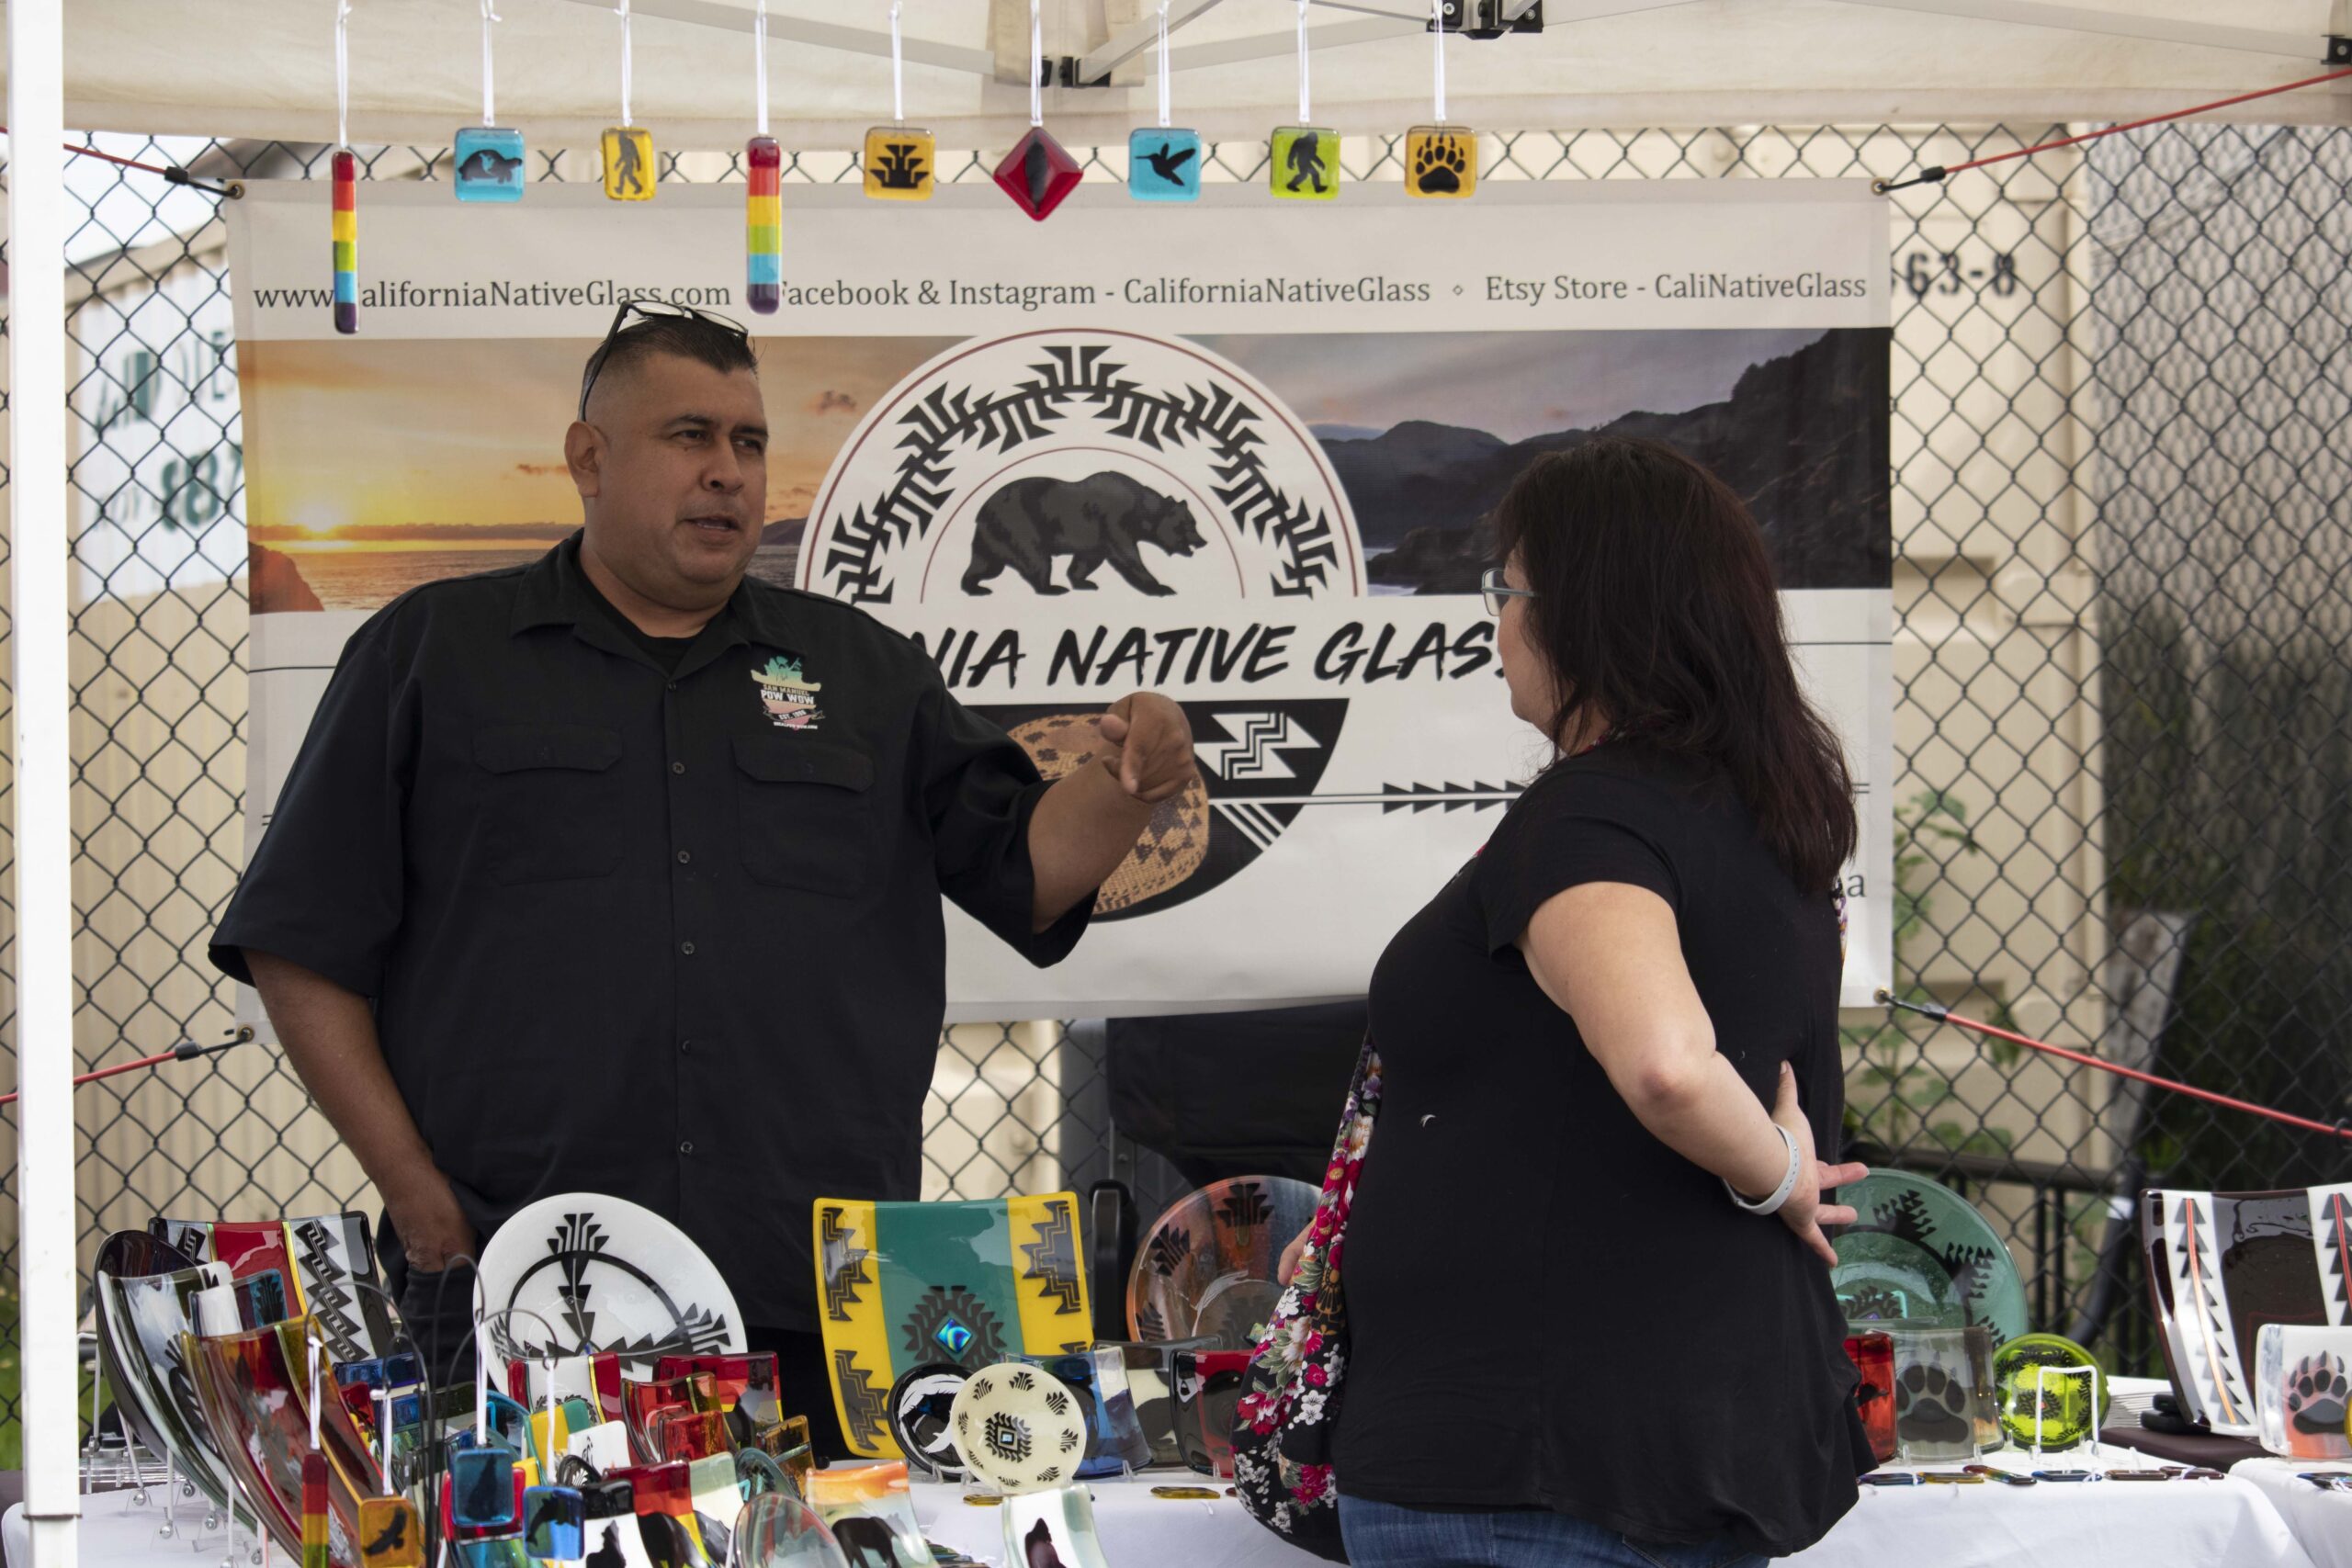 Indigenous Red Market vendor displaying traditional Native American art and talking with an attendee